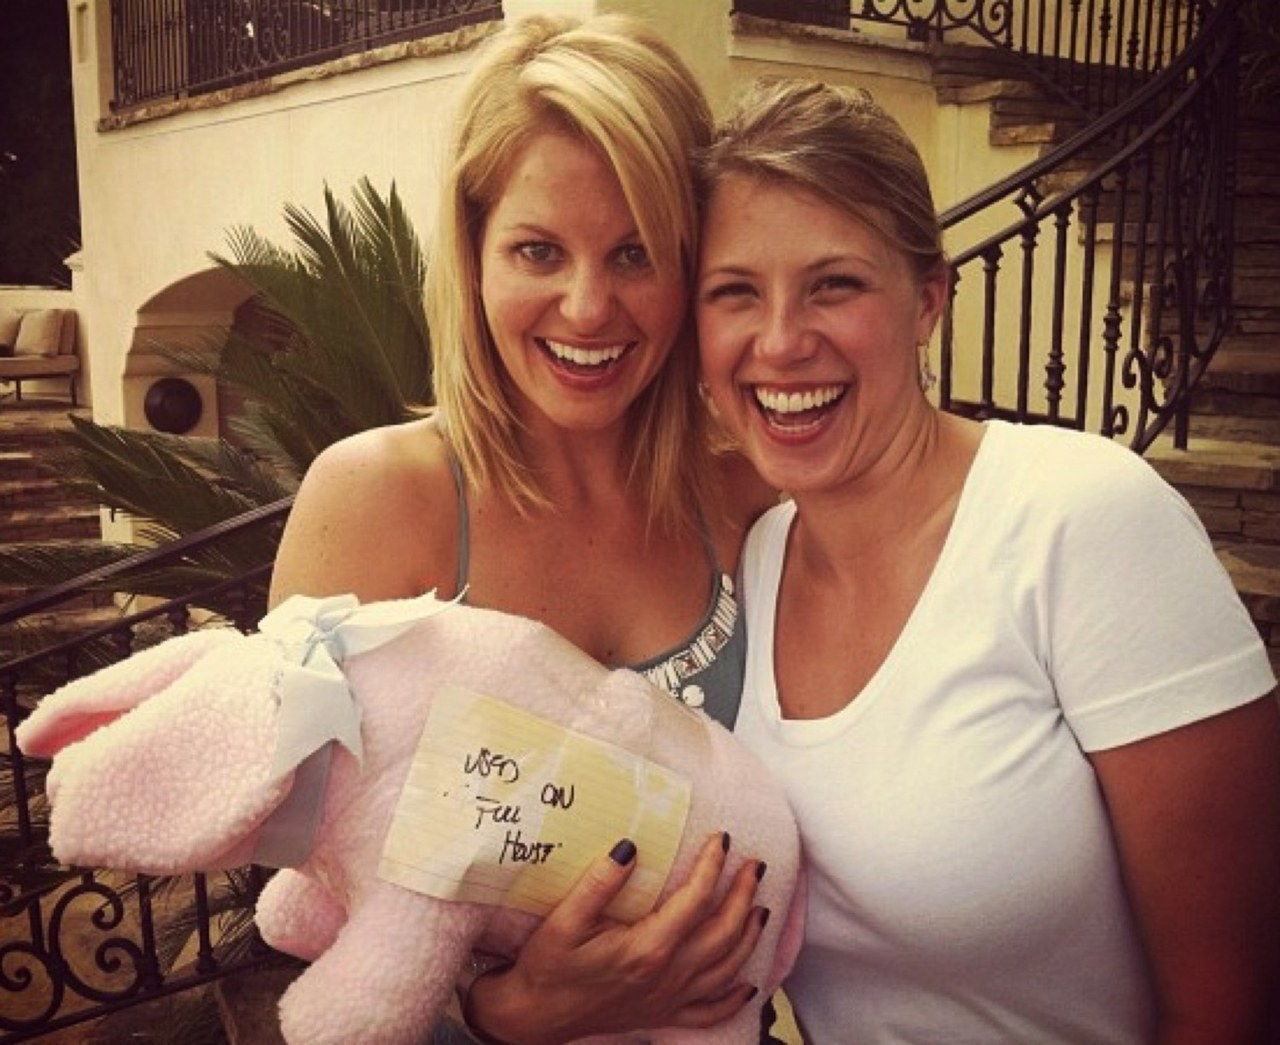 Candace cameron jodie sweetin full house pig now